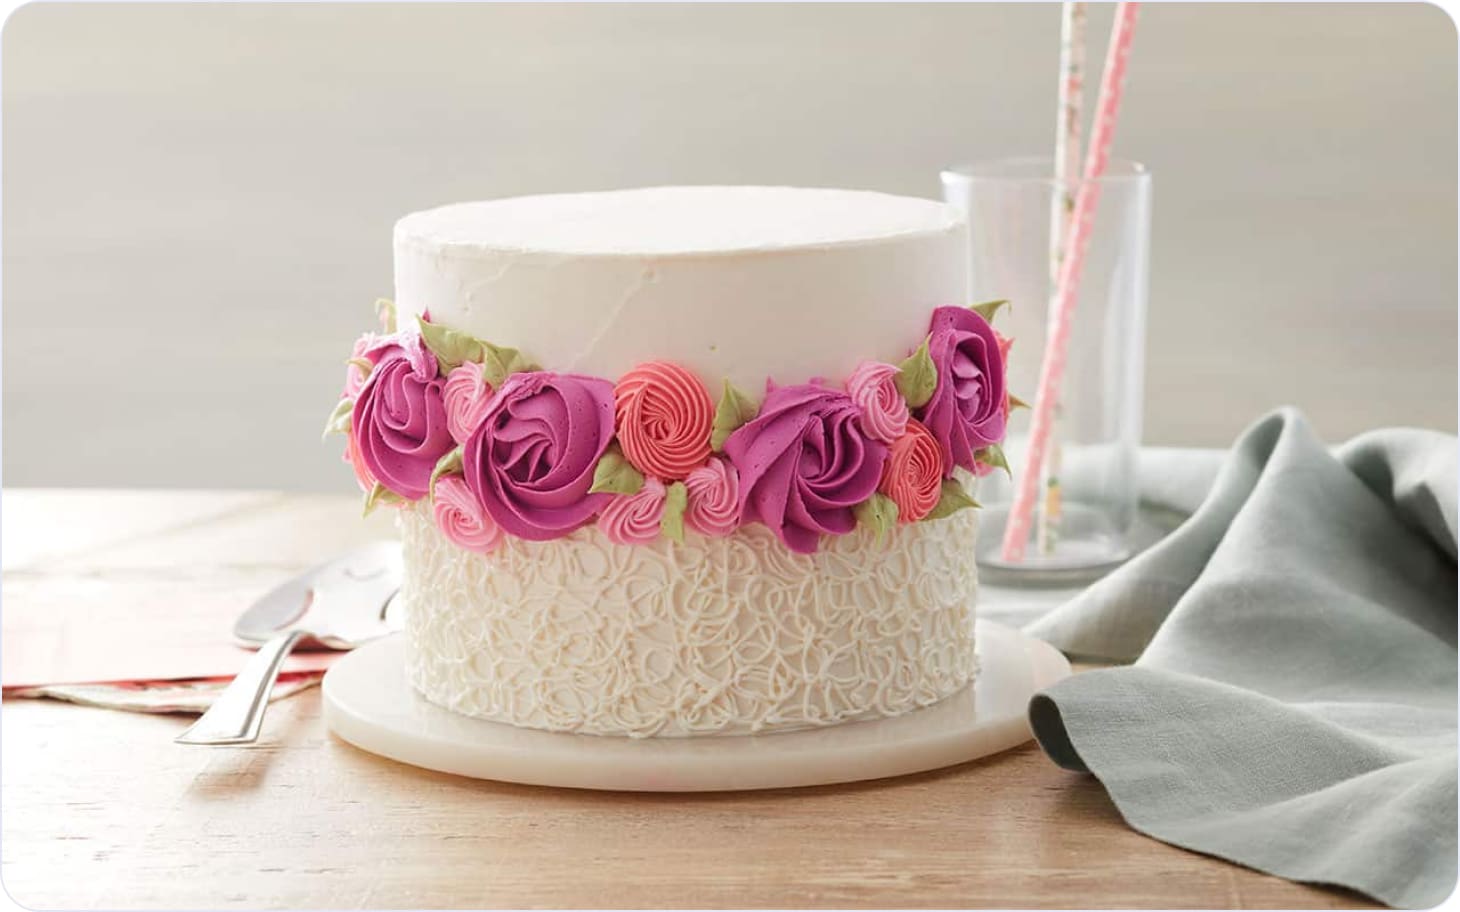 Example of making rosettes with buttercream